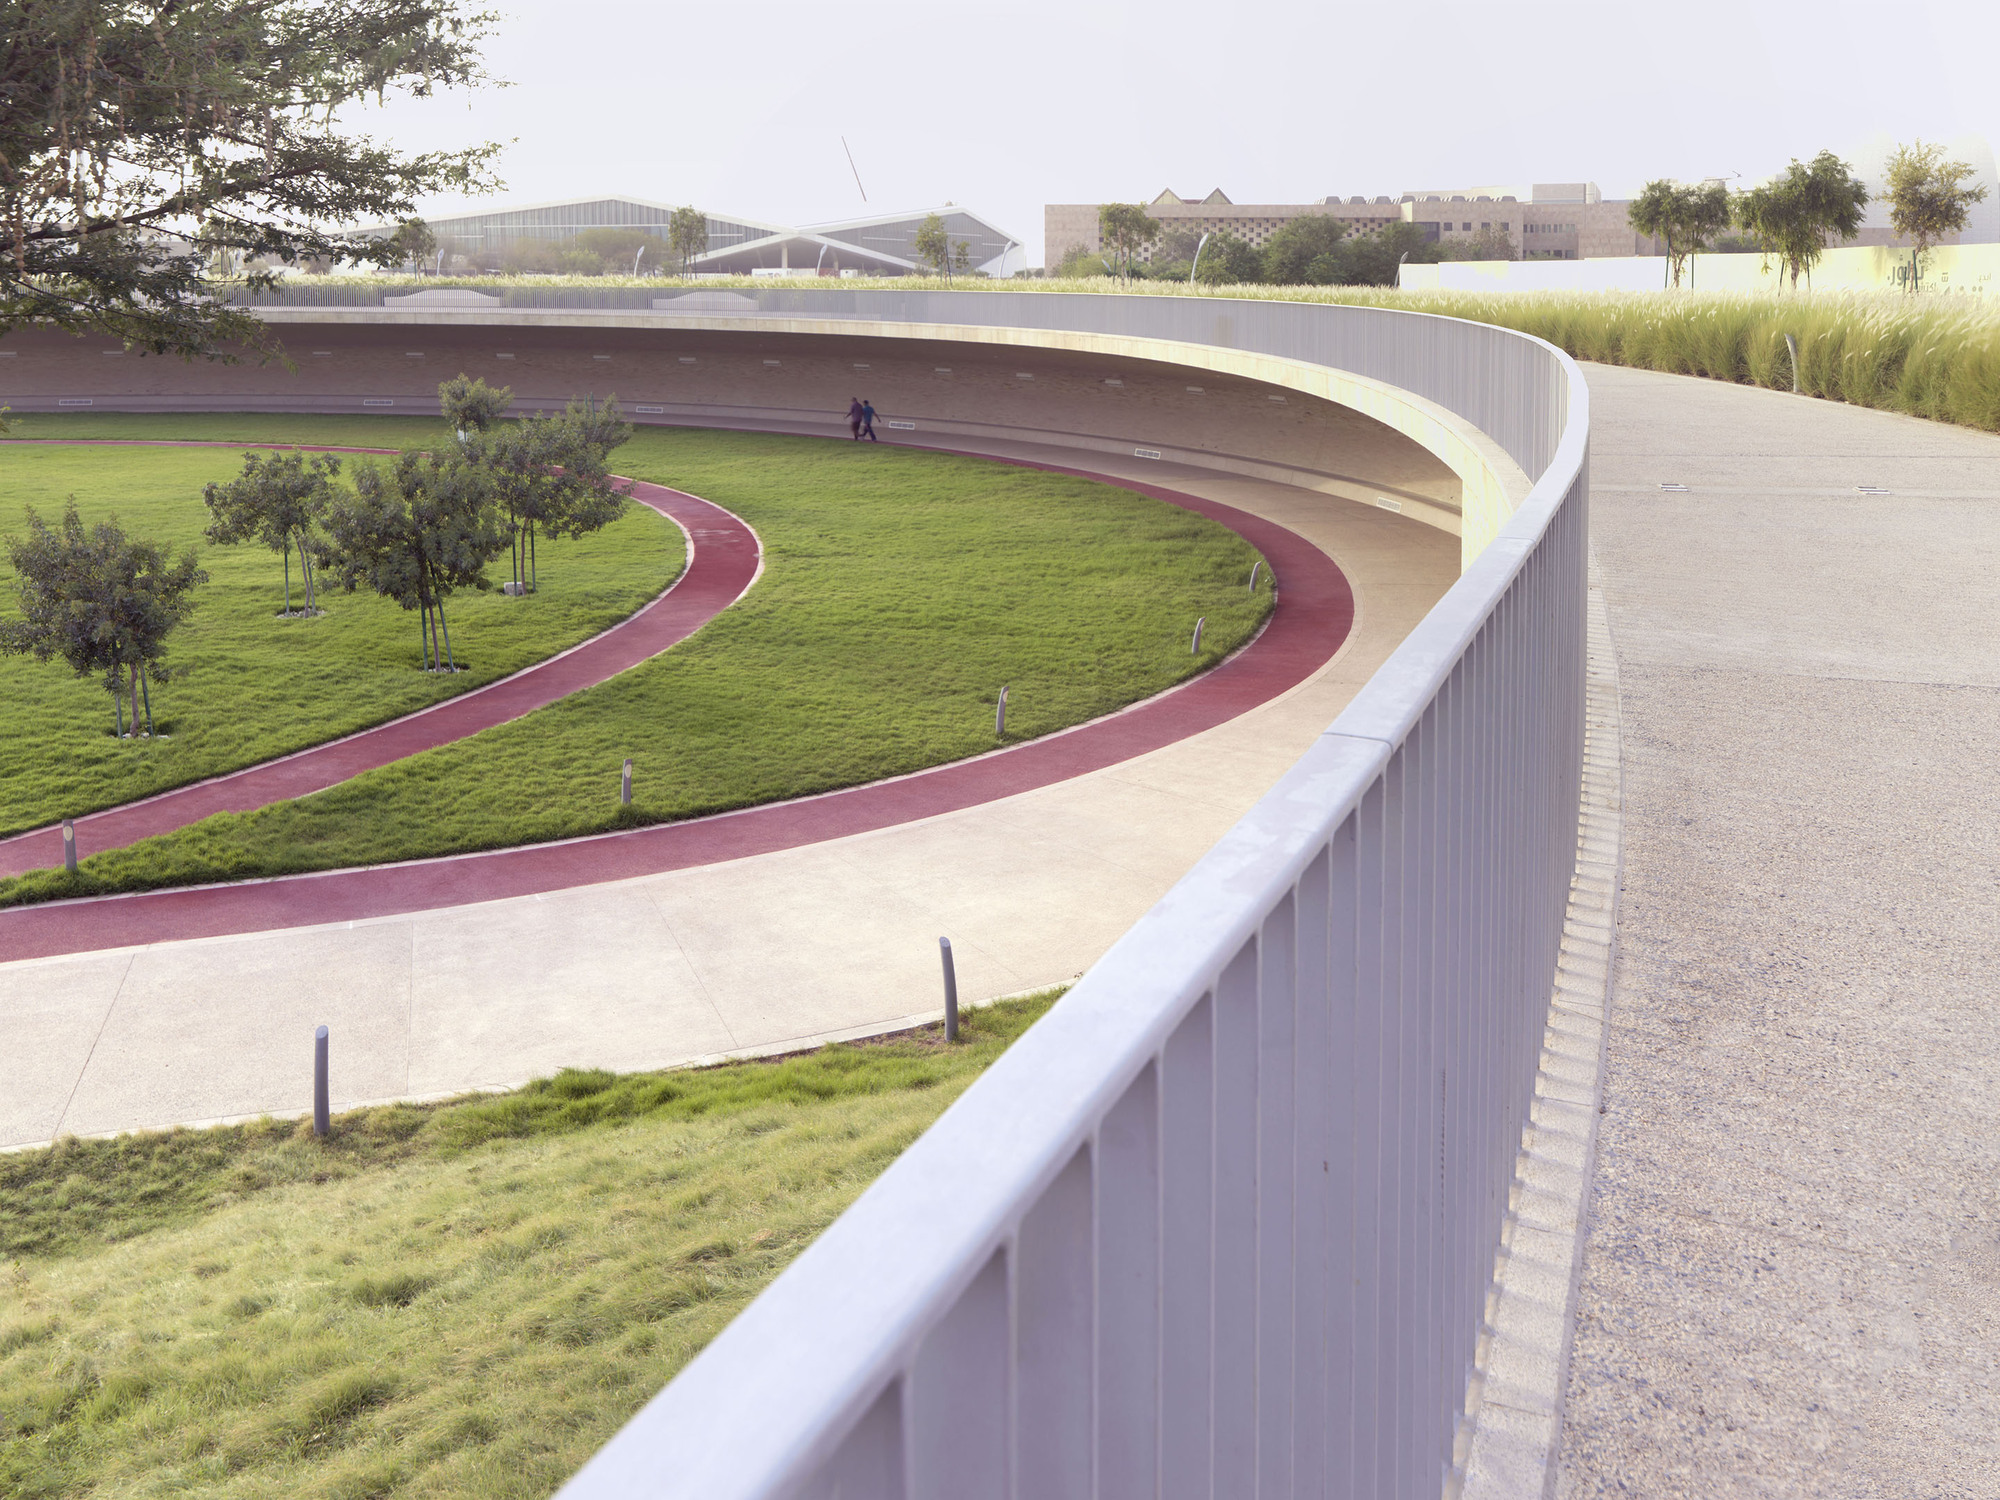 With a wavy topography formed by hilly soil and swales, Oxygen Park can create a strong spatial framework